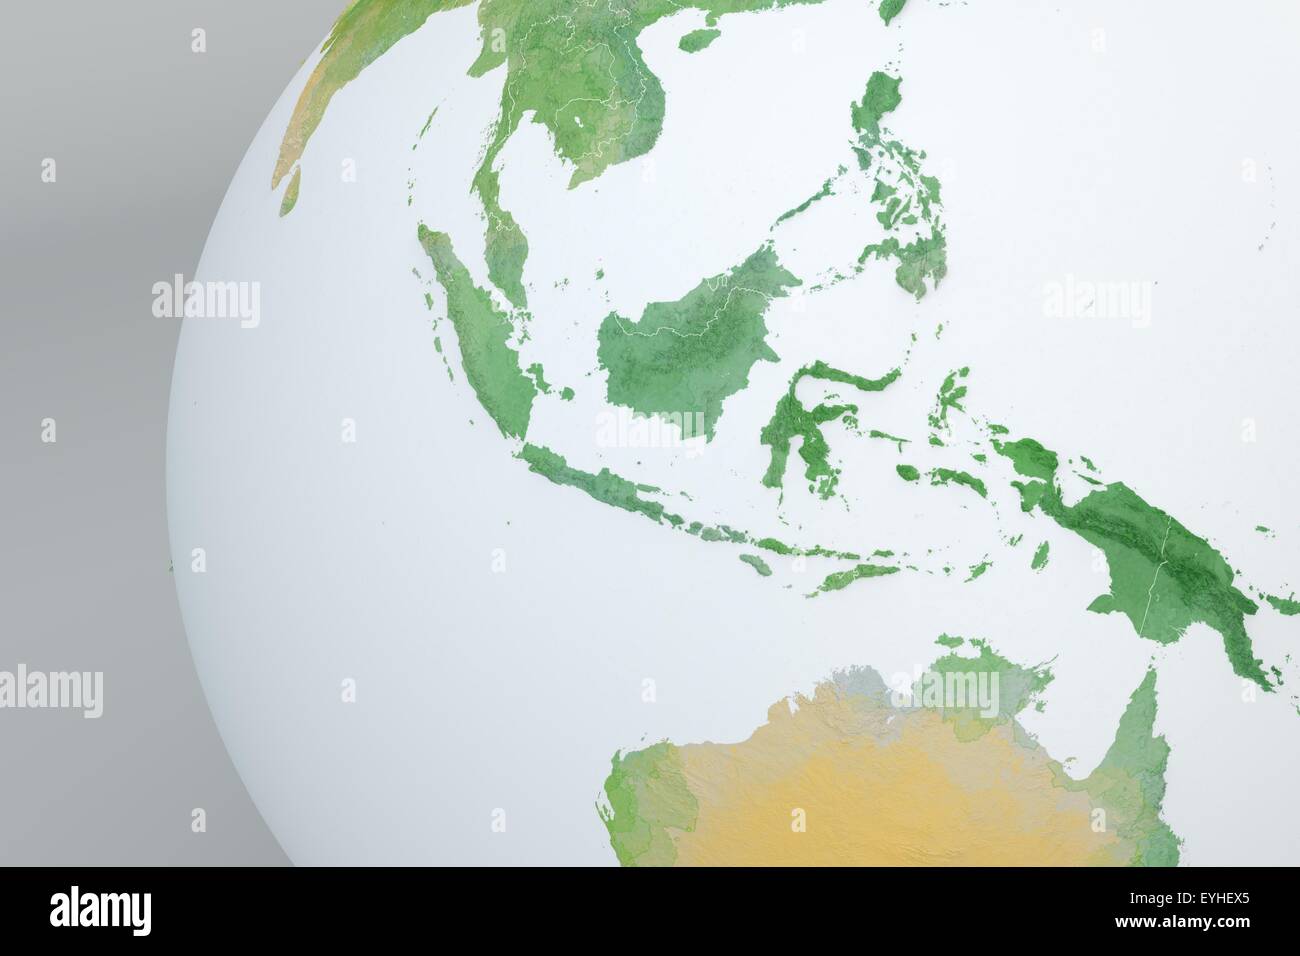 Illustration of flat Indonesia map with physical borders Stock Photo